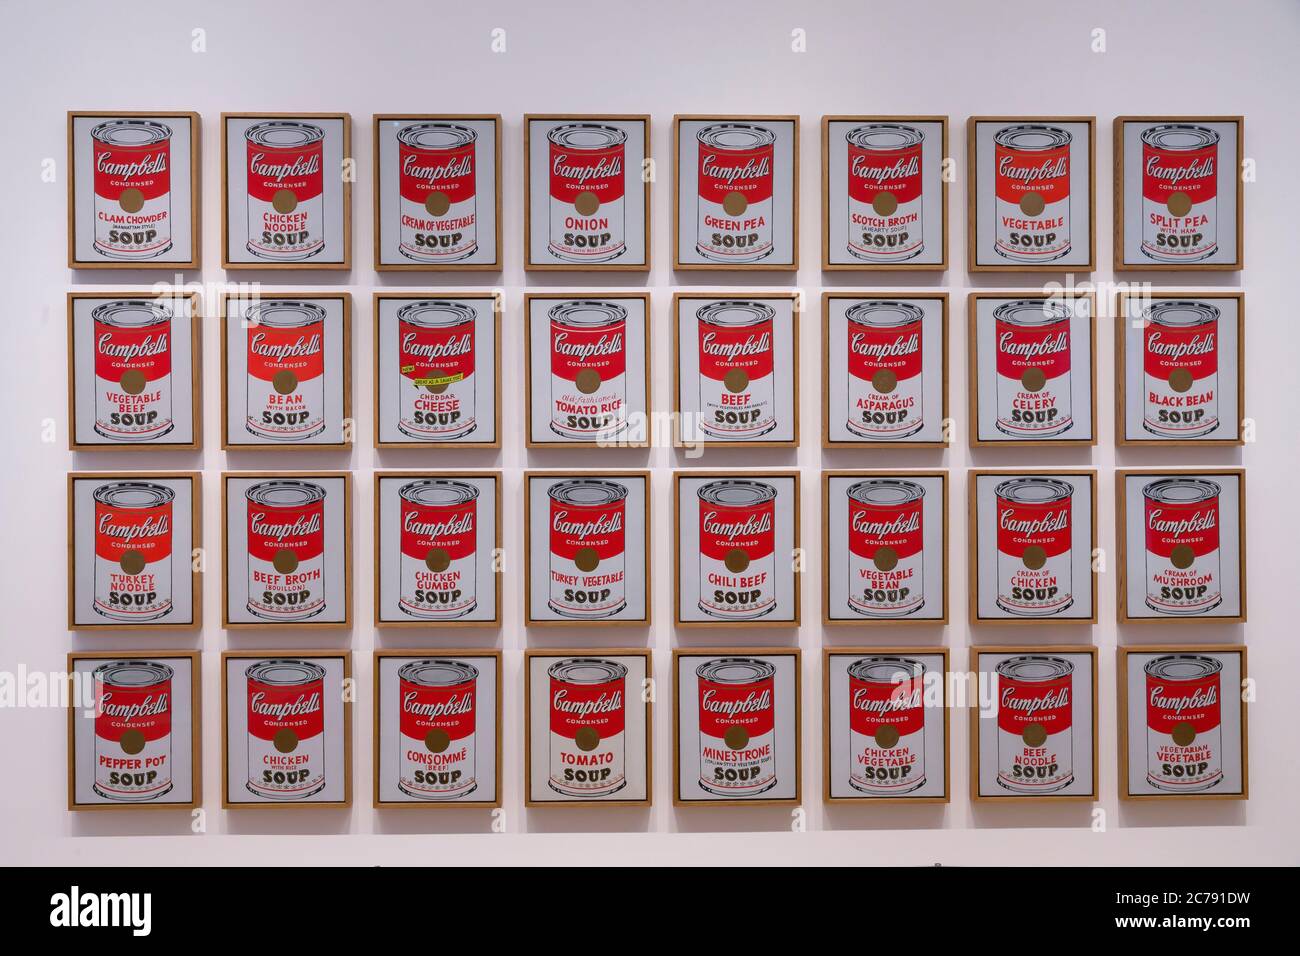 Campbell's Soup Cans, Andy Warhol, 1962, Banque D'Images